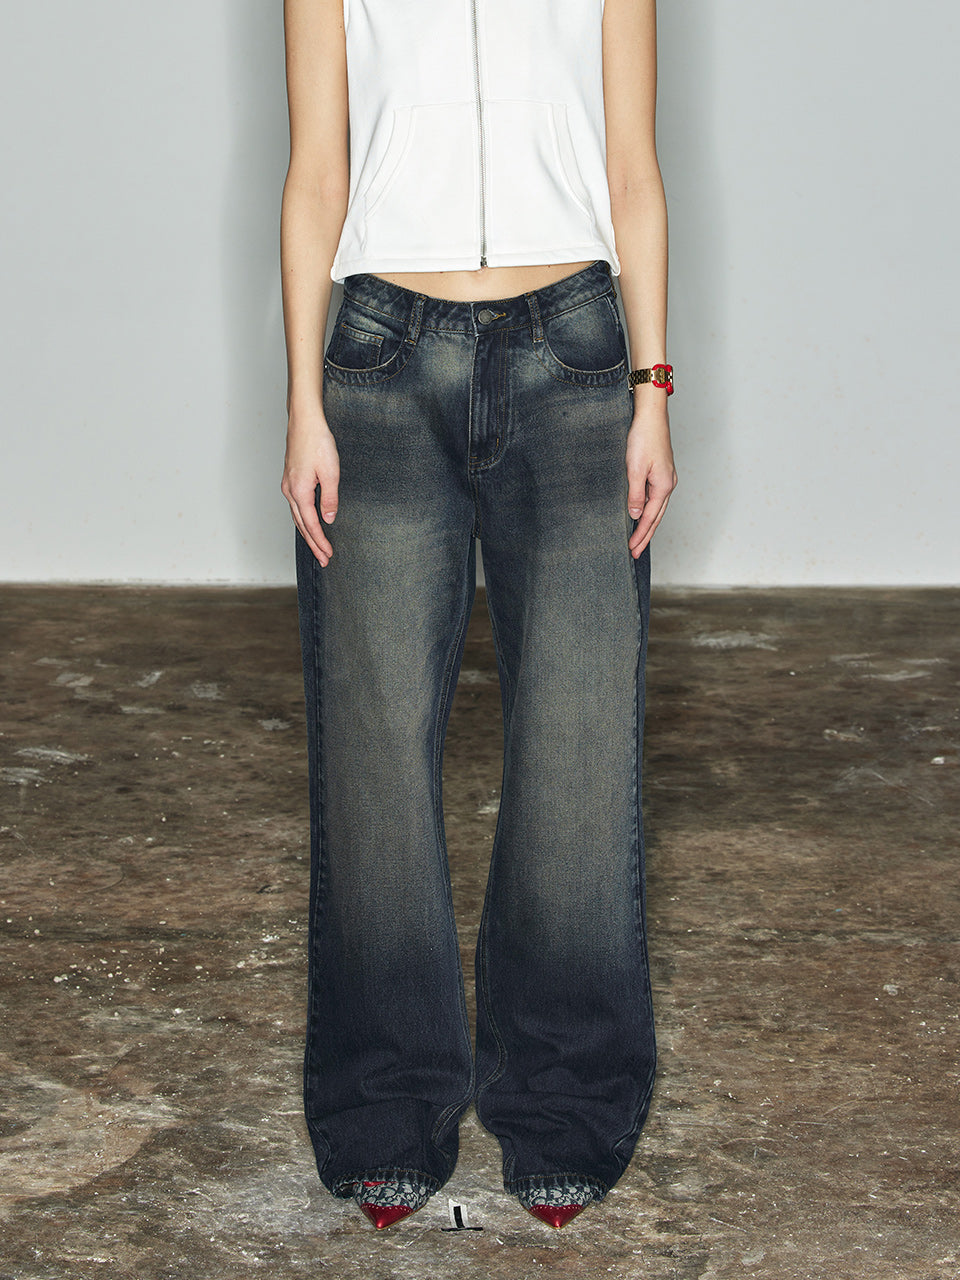 NUTH "Ode to Variations" Rinsed Indigo Jeans